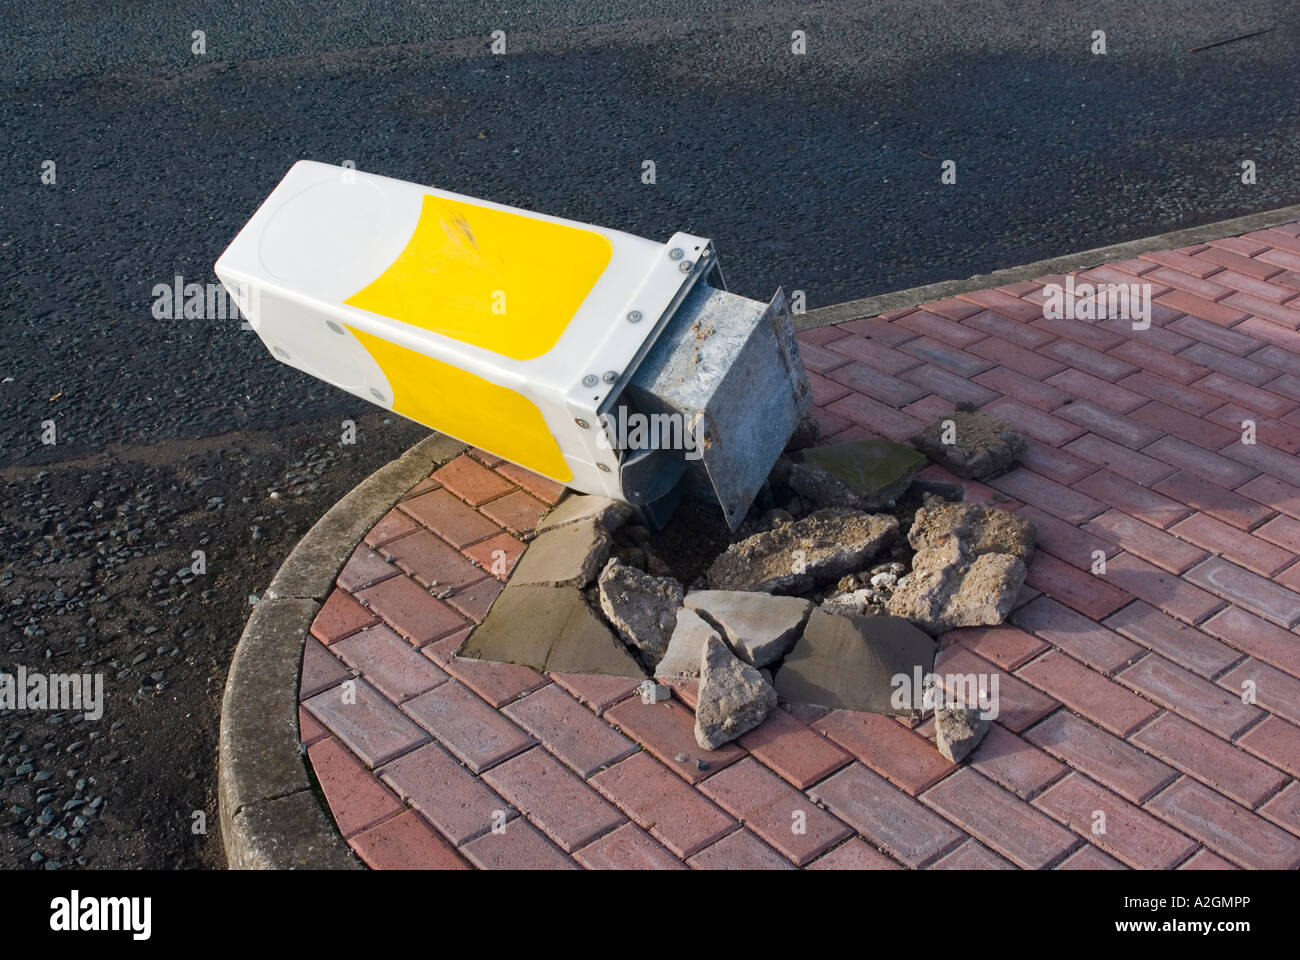 Illuminated traffic bollard vandalised or knocked down in an accident Stock Photo